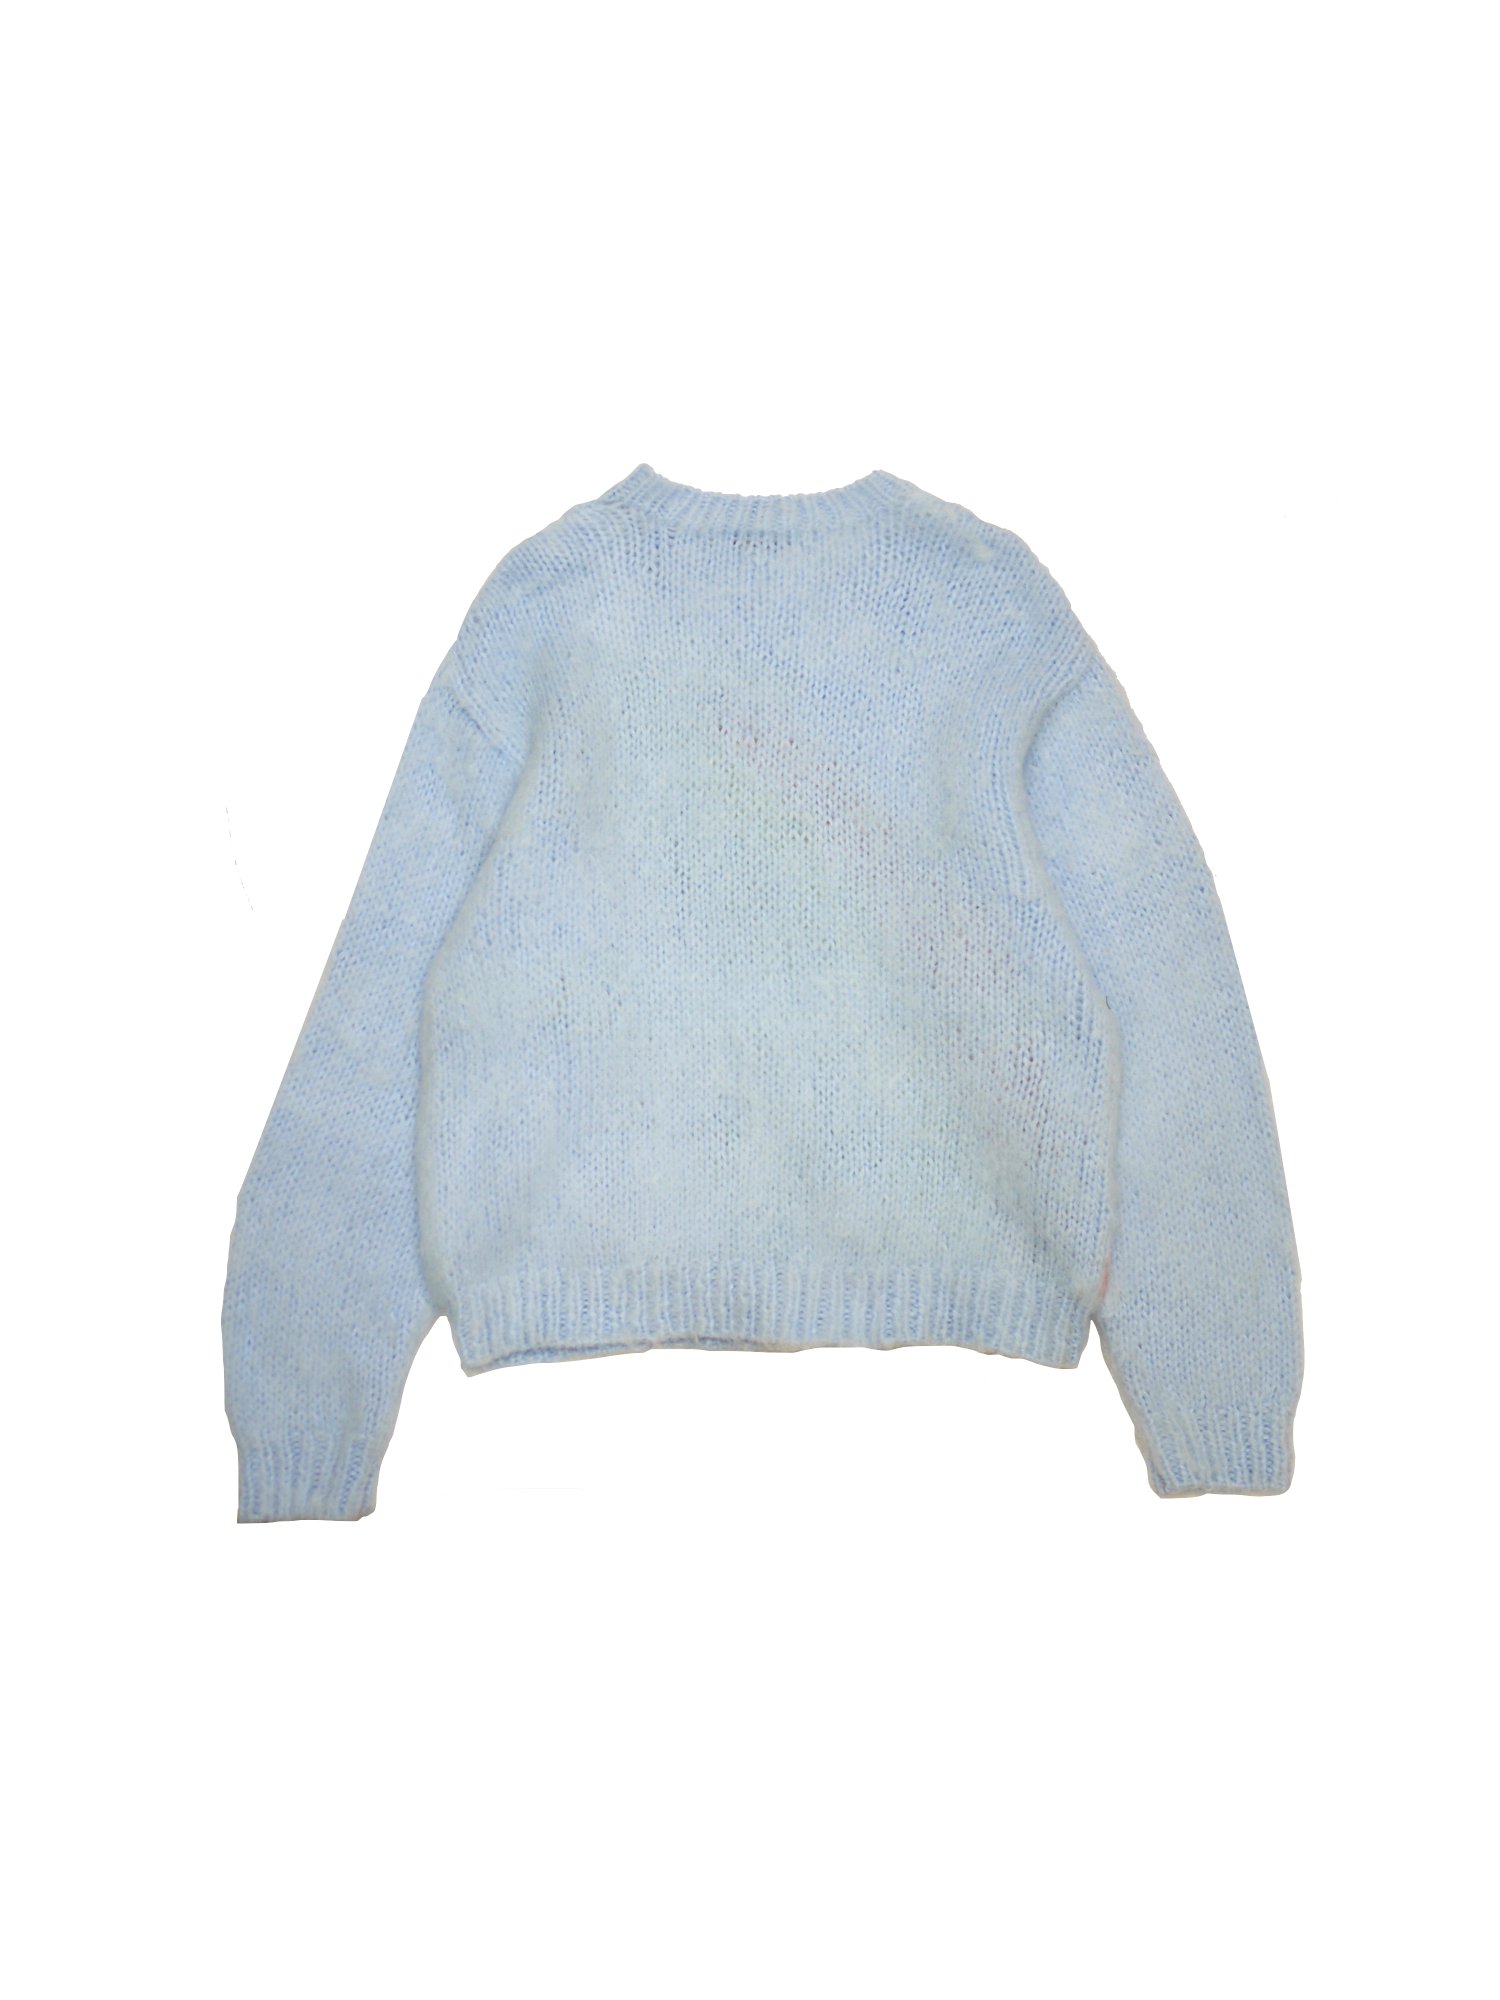 JieDa<br />MOHAIR RAINBOW KNIT / SAX<img class='new_mark_img2' src='https://img.shop-pro.jp/img/new/icons14.gif' style='border:none;display:inline;margin:0px;padding:0px;width:auto;' />